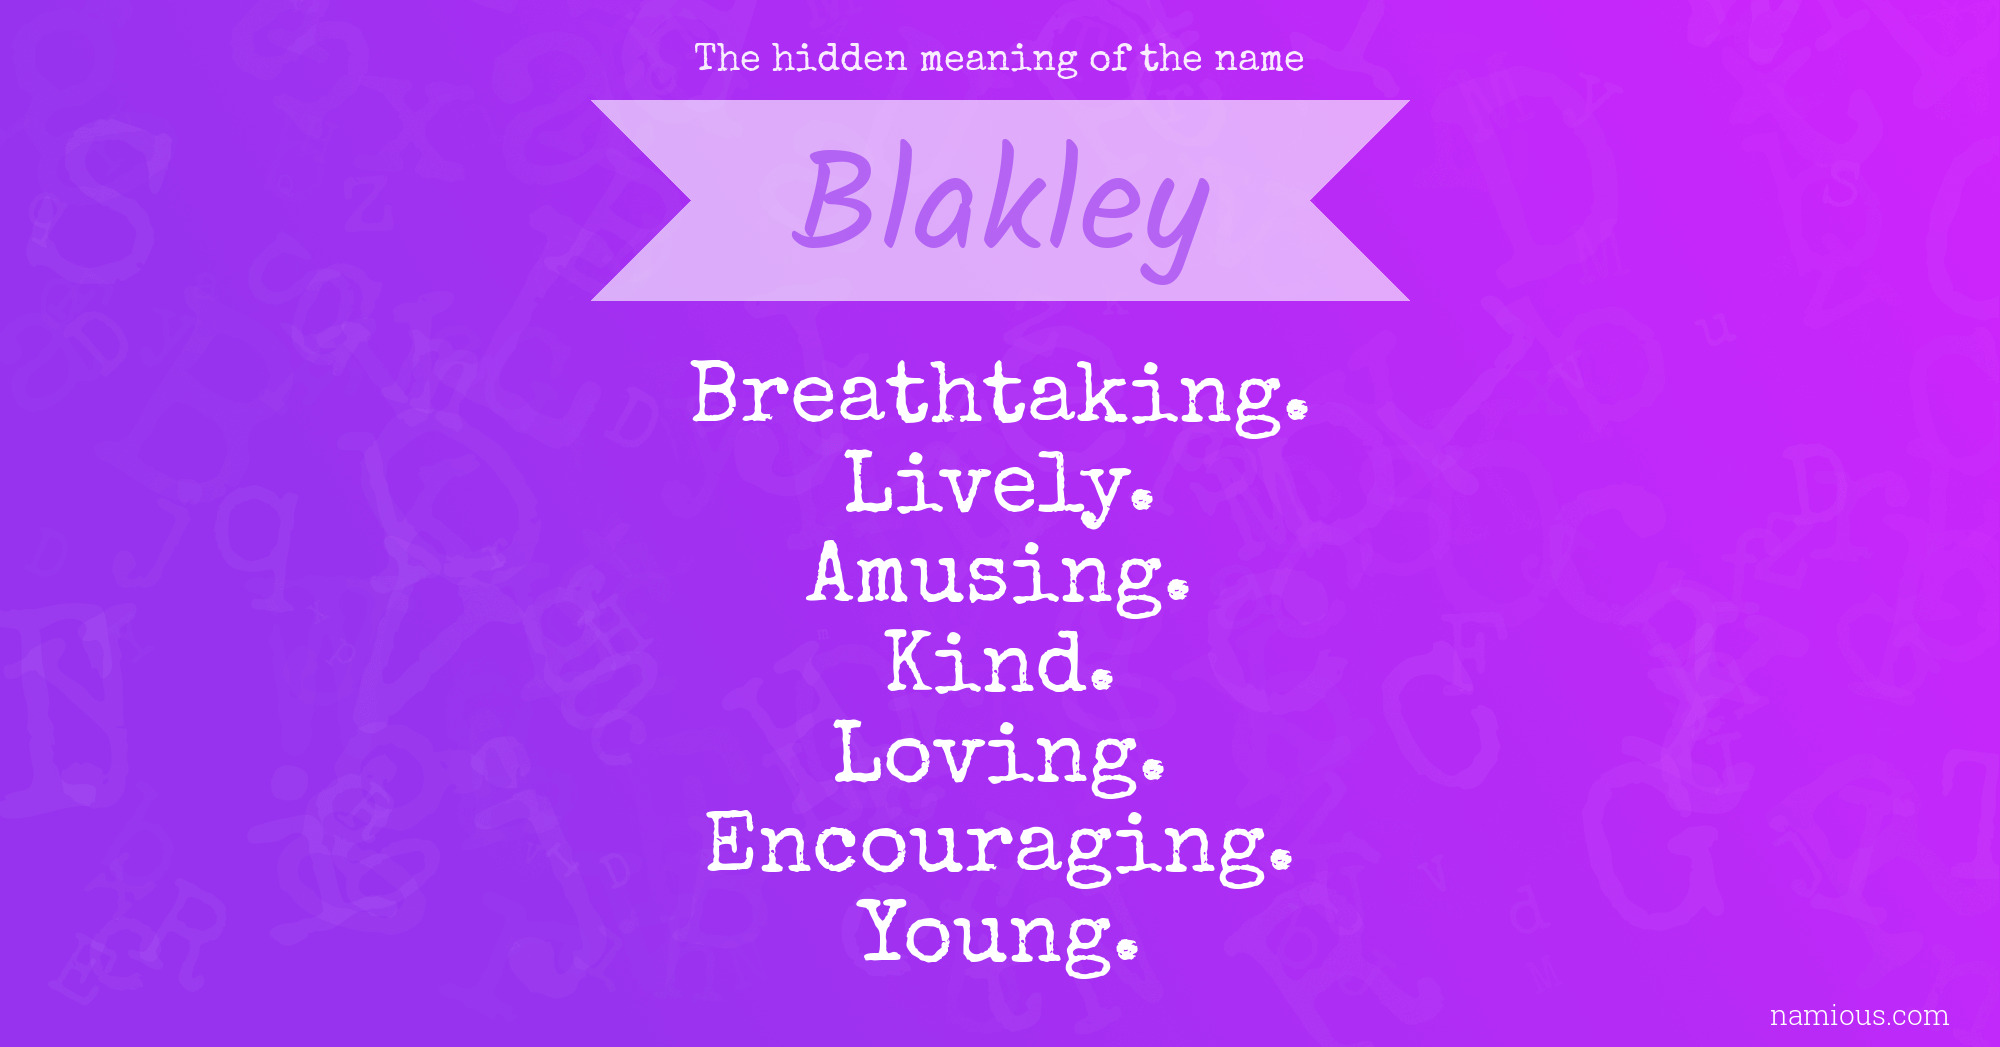 The hidden meaning of the name Blakley